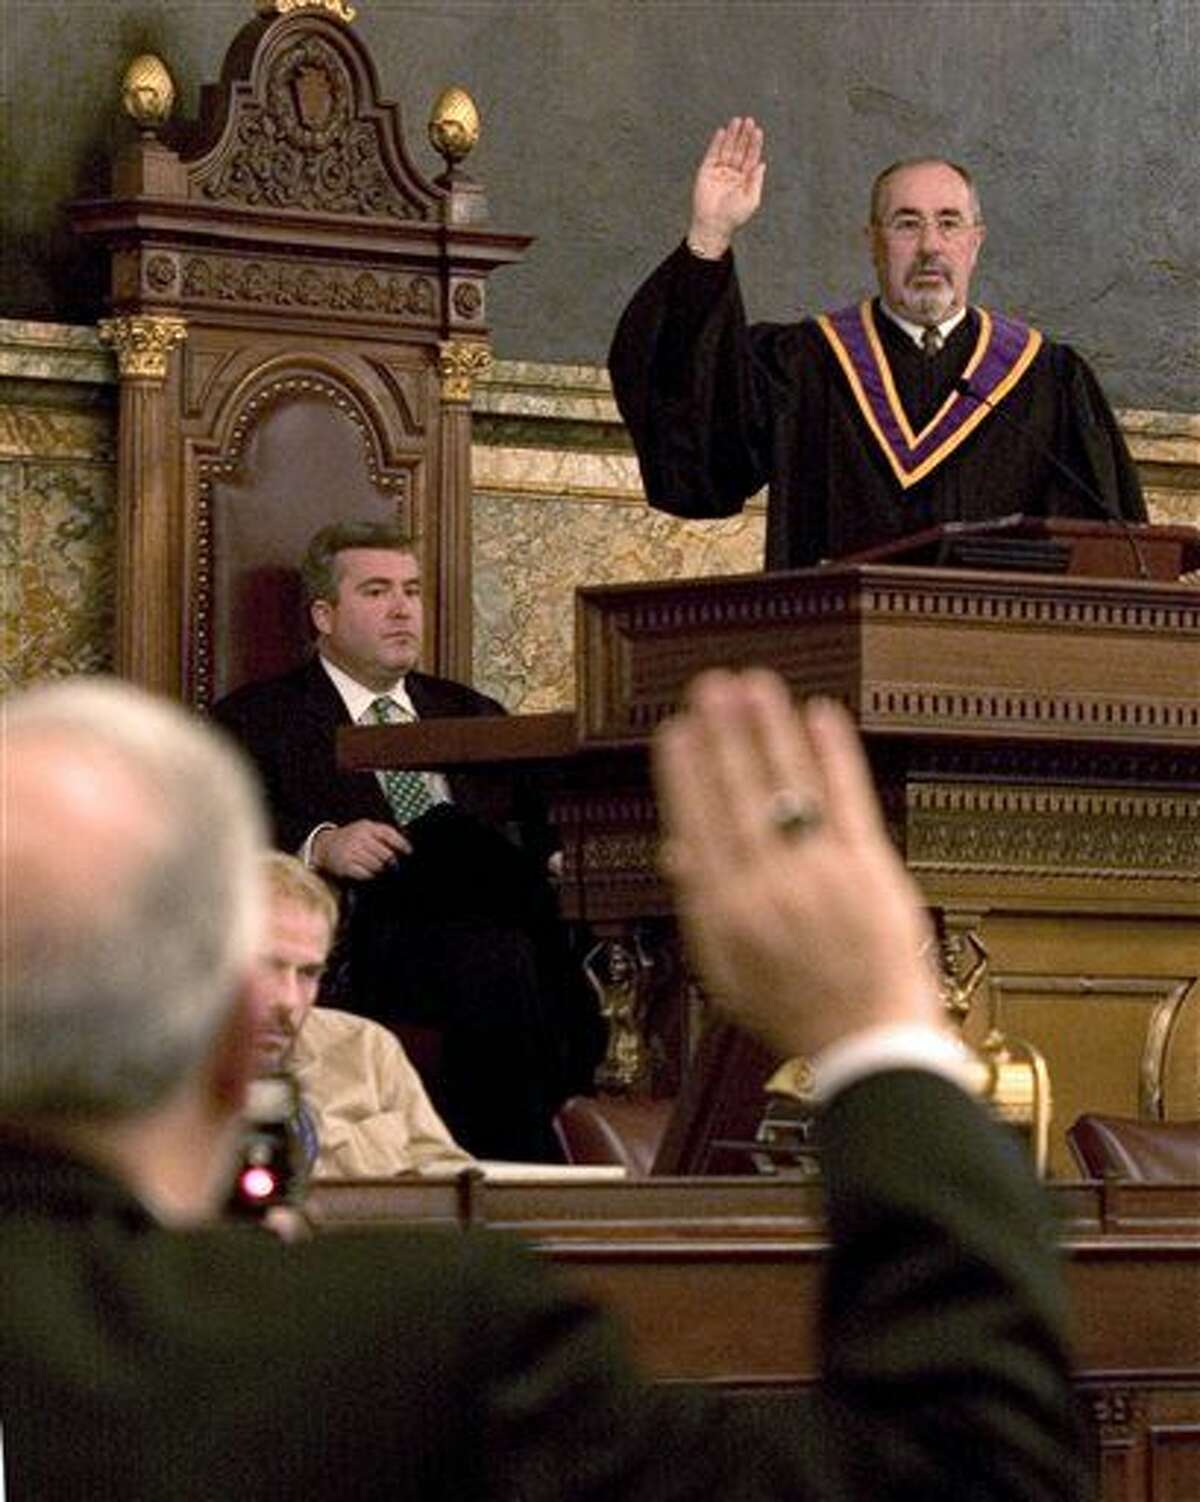 FILE - In this Dec. 13, 2004, file photo, Pennsylvania Supreme Court Justice Michael Eakin recites the oath of office during the proceedings of the 55th Pennsylvania Electoral College at the State Capitol in Harrisburg, Pa. Eakin's decision to step down was announced Tuesday, March 15, 2016, in a widening scandal over the exchange of raunchy and offensive emails among friends and lawyers. (AP Photo/Daniel Shanken, File)